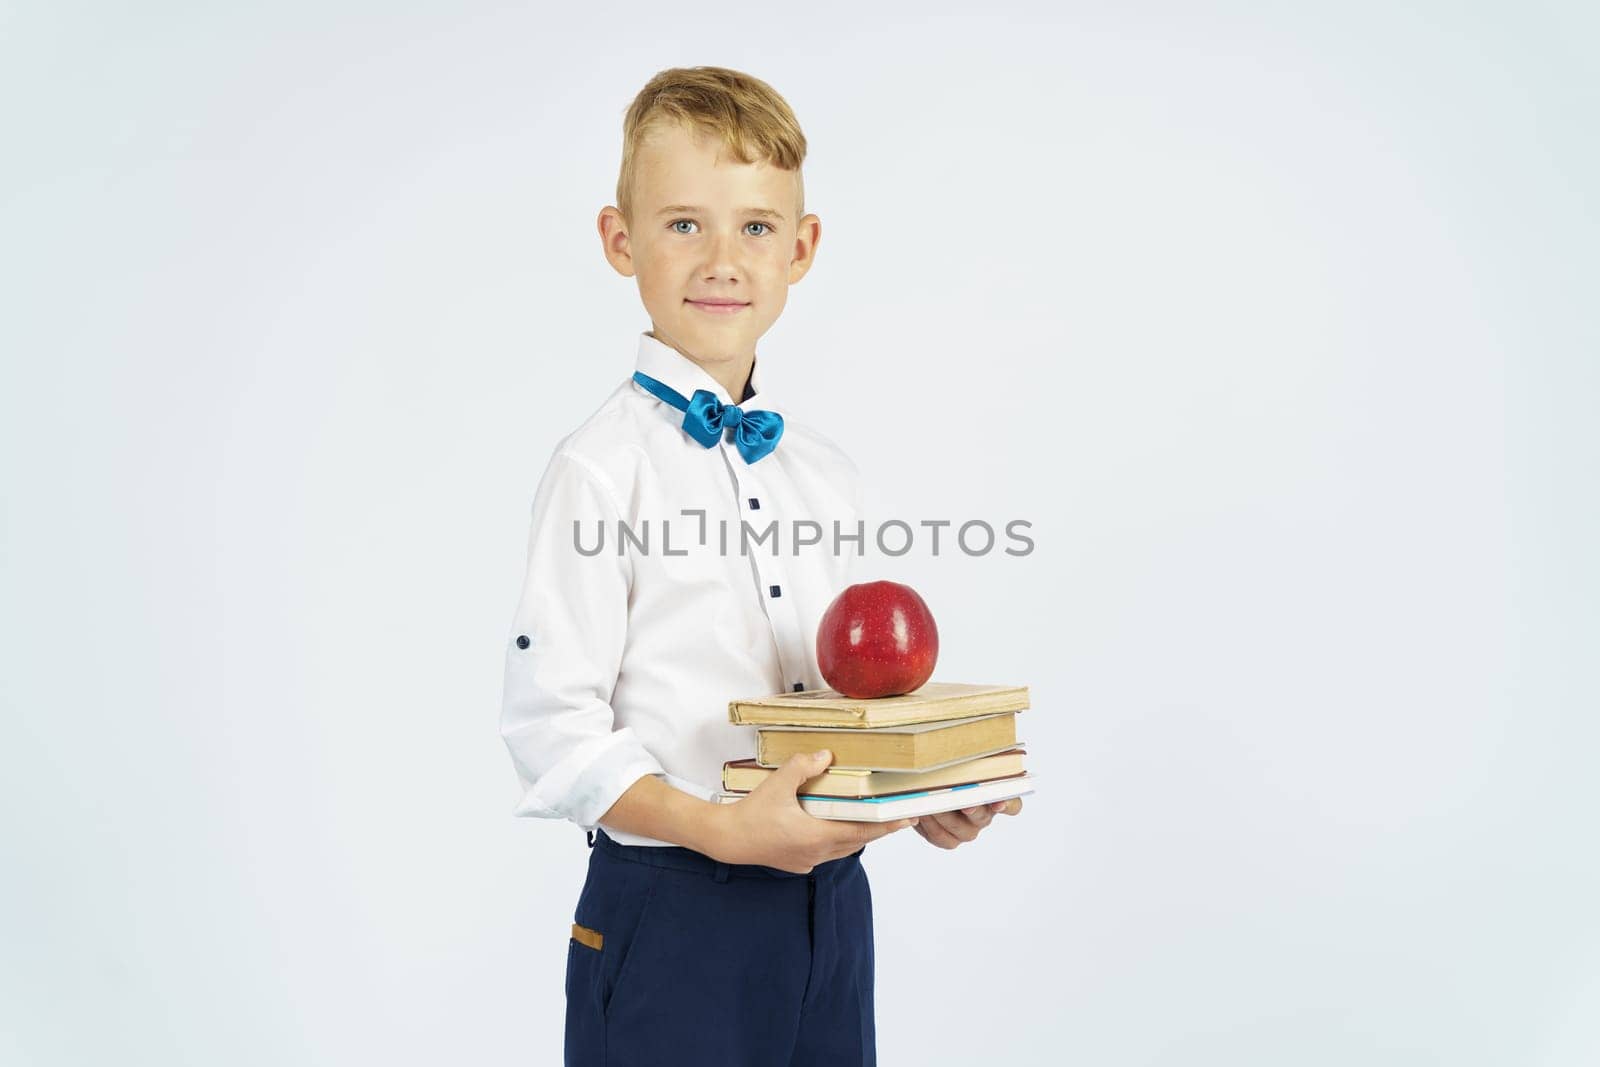 The schoolboy holds books and an apple in his hands. Isolated background. Education concept